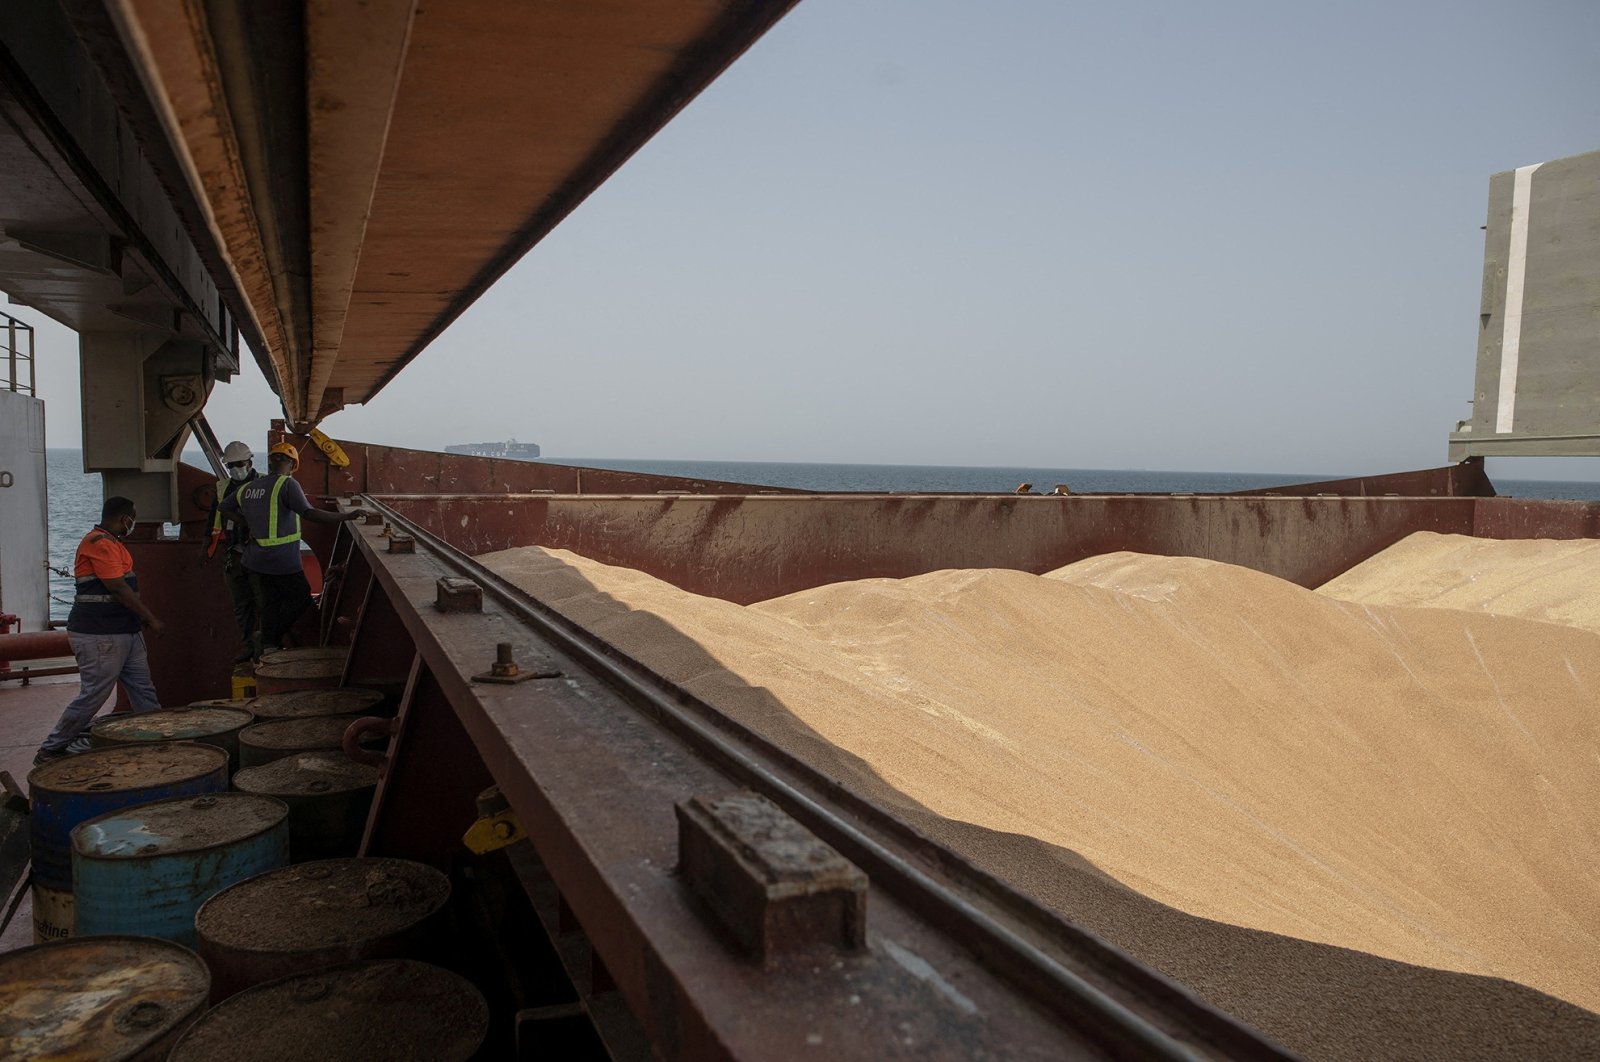 Wheat grain is seen on the MV Brave Commander vessel from Yuzhny Port in Ukraine to the drought-stricken Horn of Africa as it docks at the port of Djibouti in Djibouti, Aug. 30, 2022. (Reuters Photo)